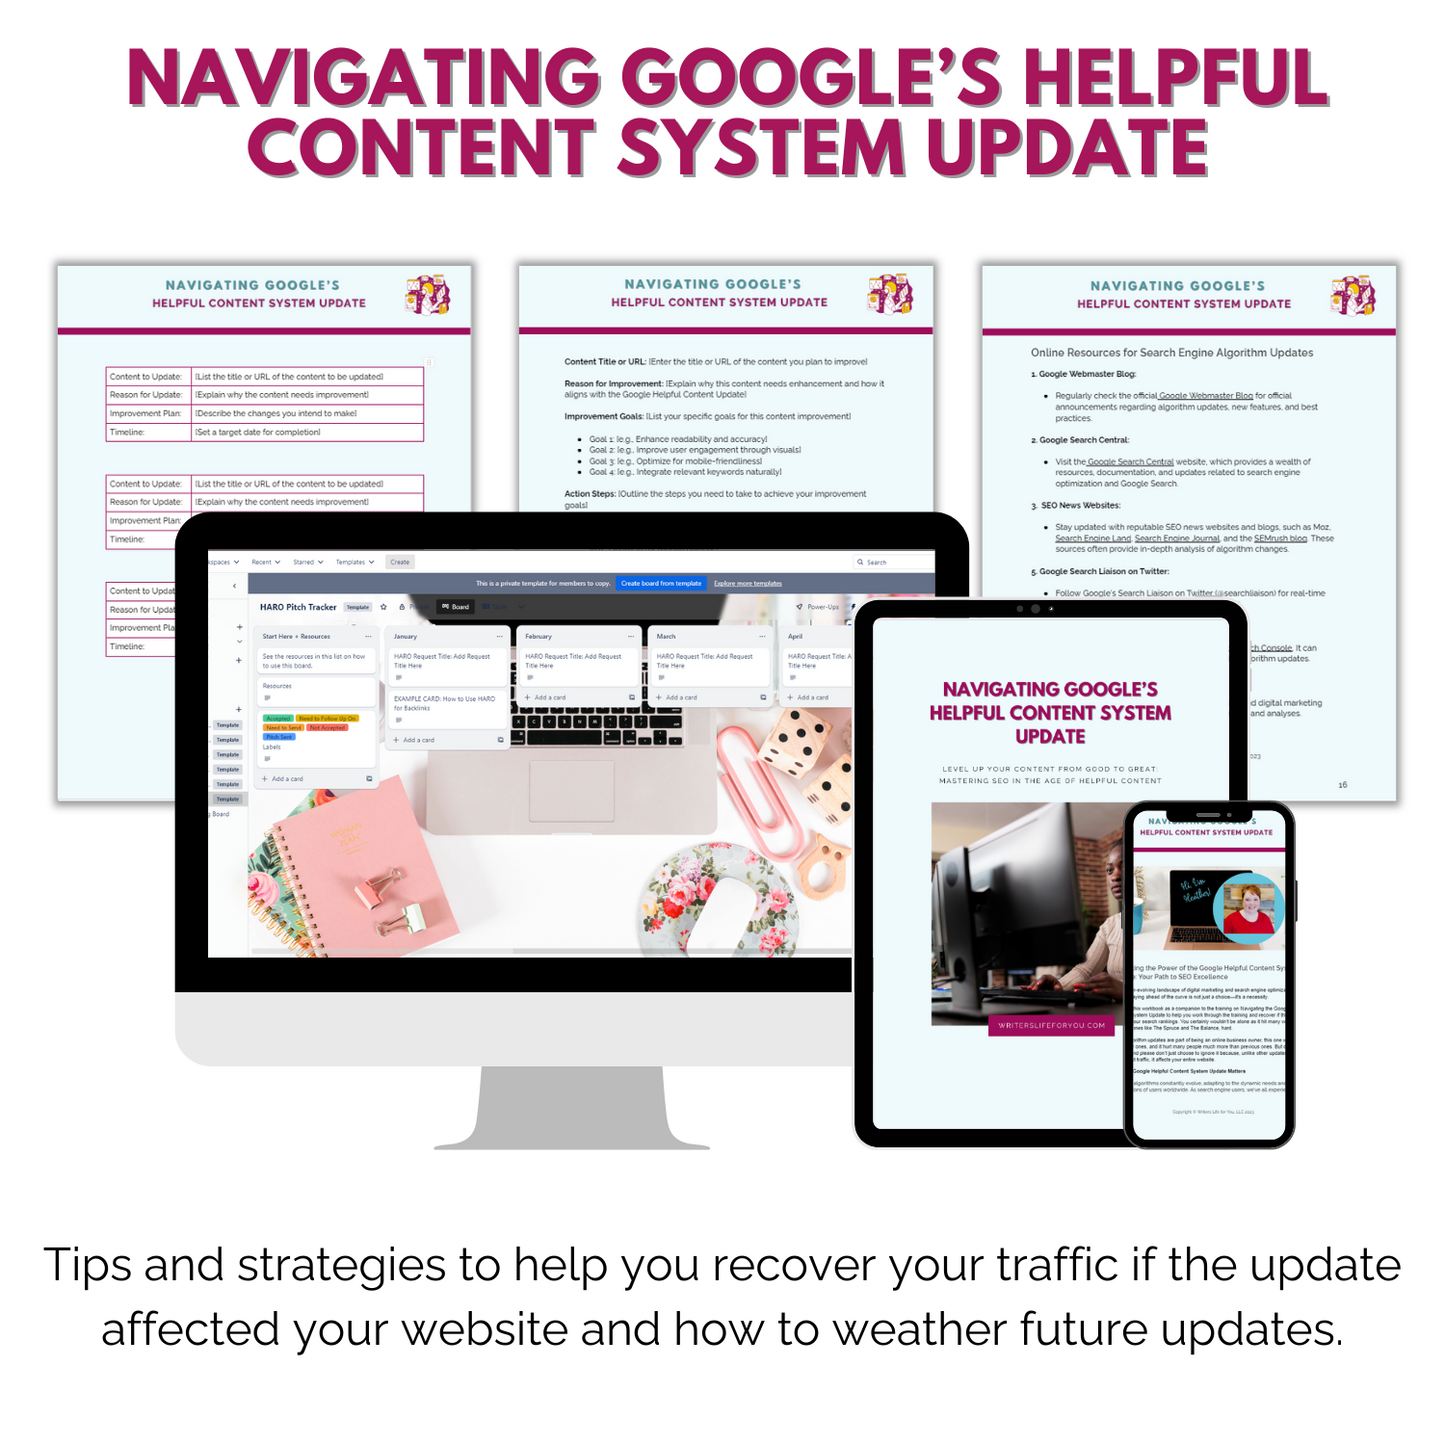 Navigating Google's Helpful Content Update - Tips and strategies to help you recover if the update affected your website